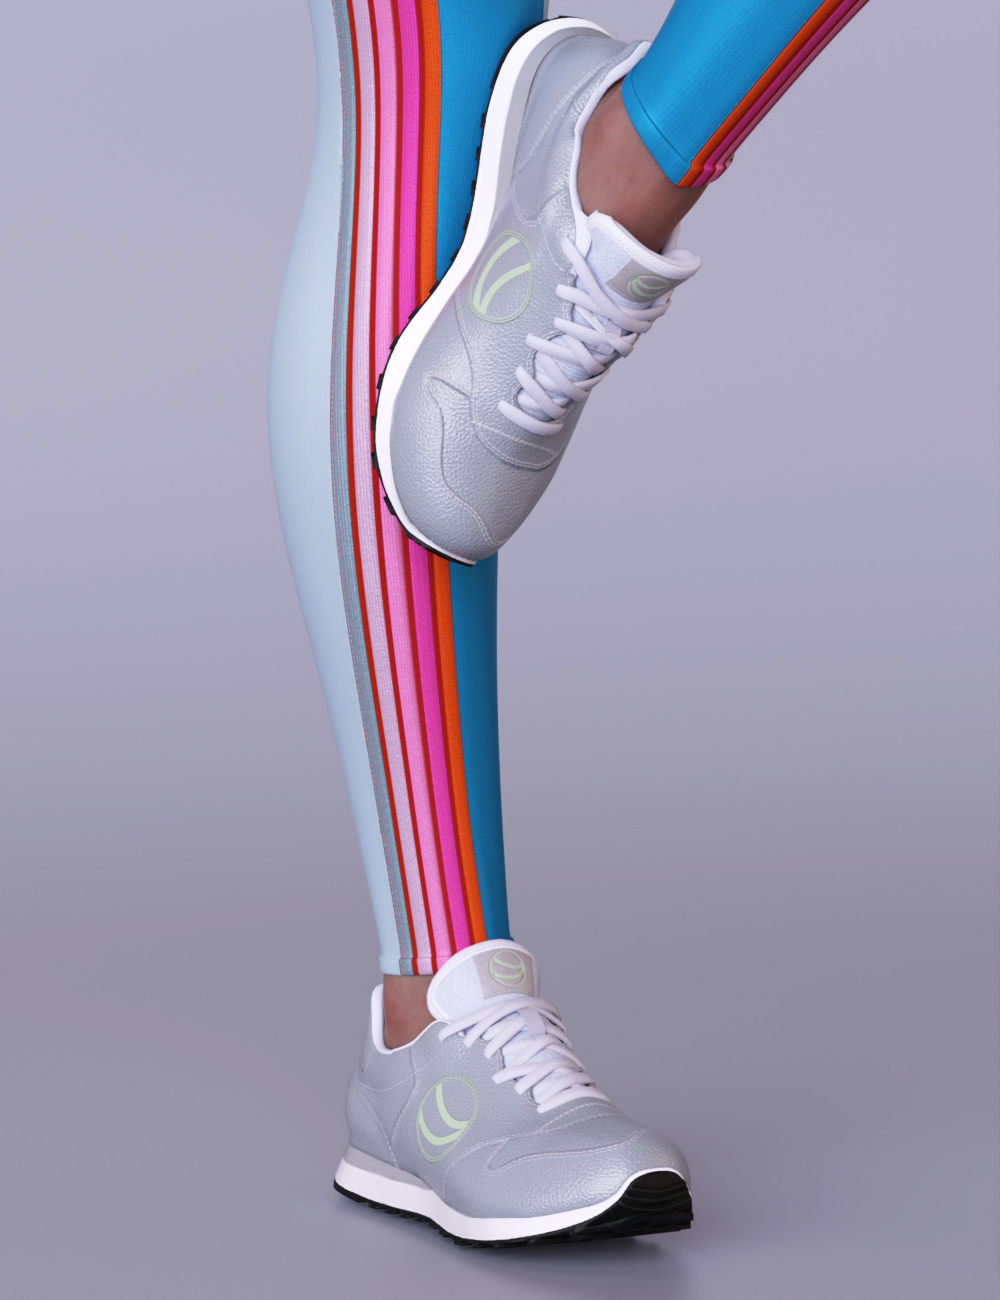 S3D Fitness Clothes for Genesis 8 Females by: Slide3D, 3D Models by Daz 3D